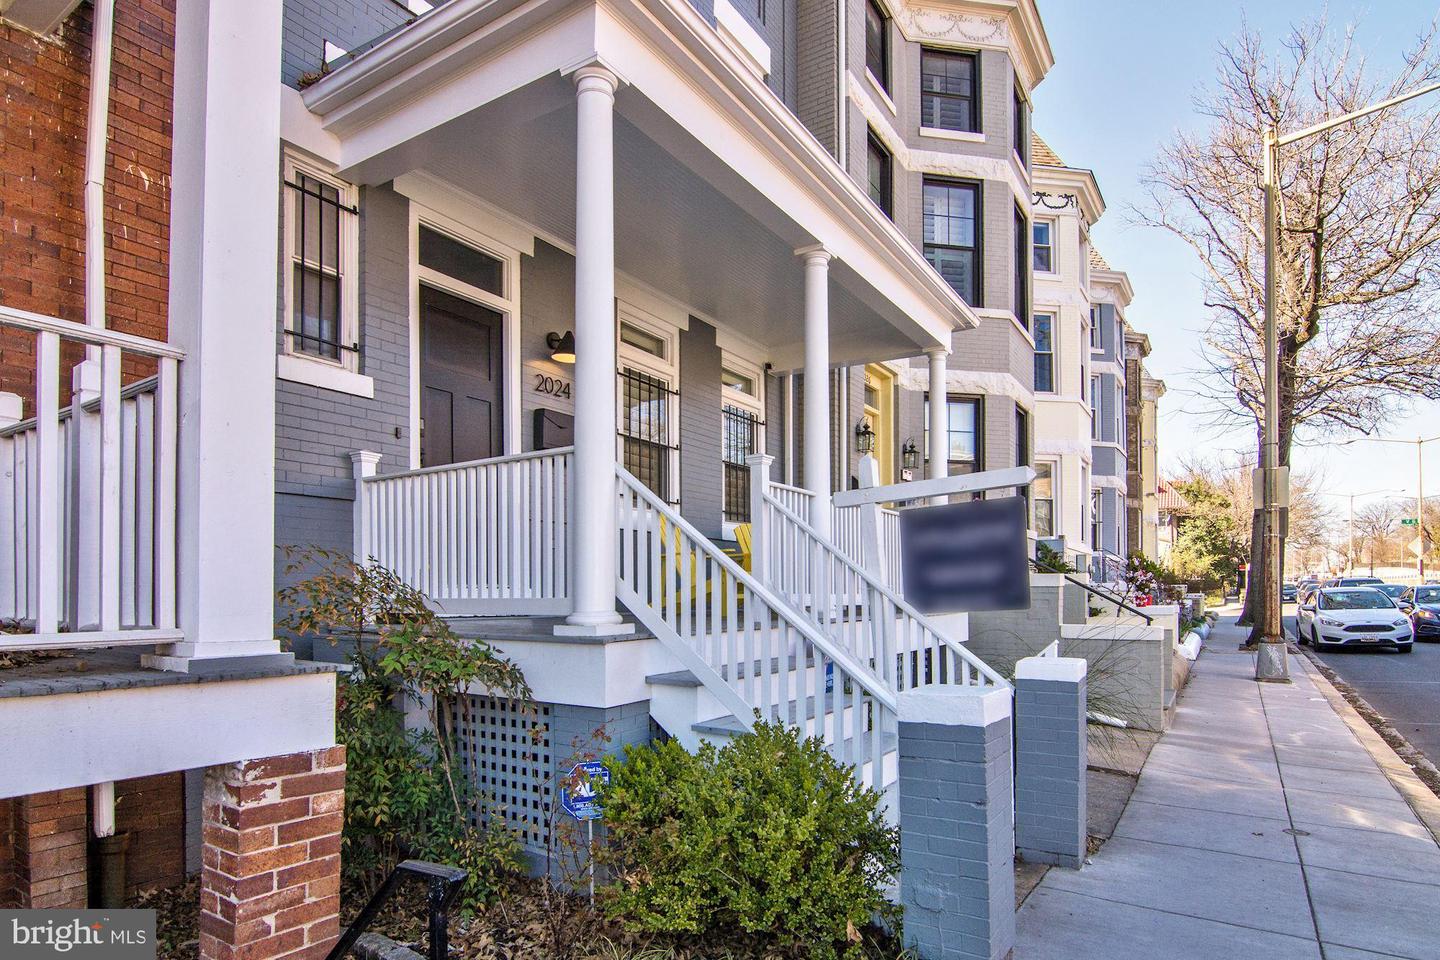 2024 N Capitol NW, Washington, District Of Columbia, 20002, townhouses for Sale